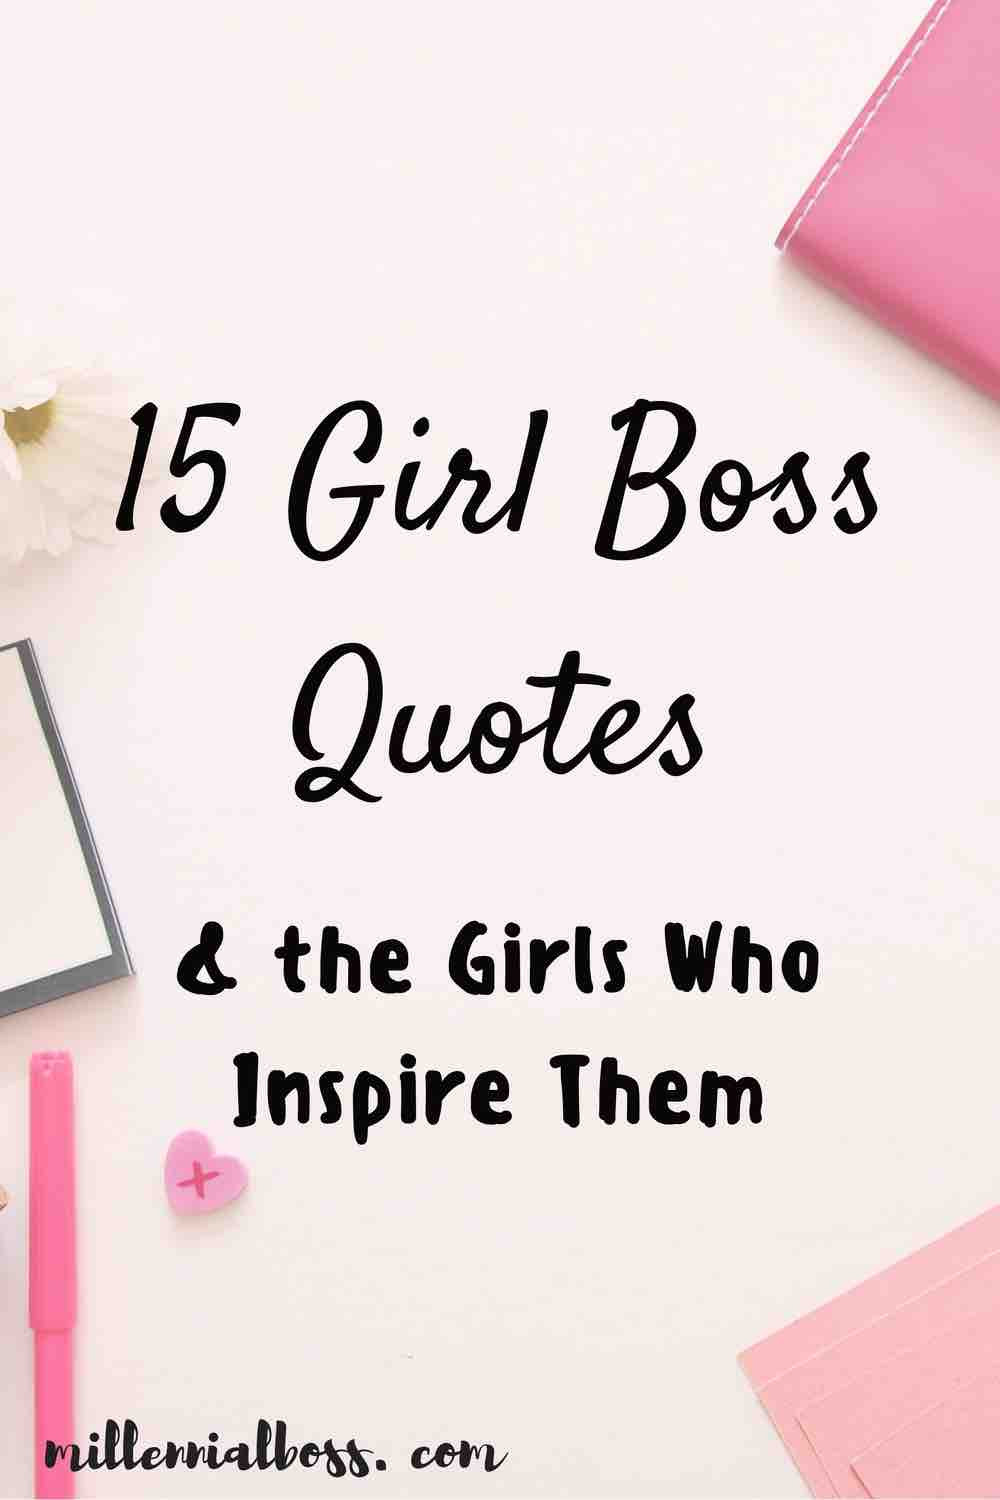 Girls Inspirational Quotes
 15 Girl Boss Quotes & the Girls Who Inspire Them